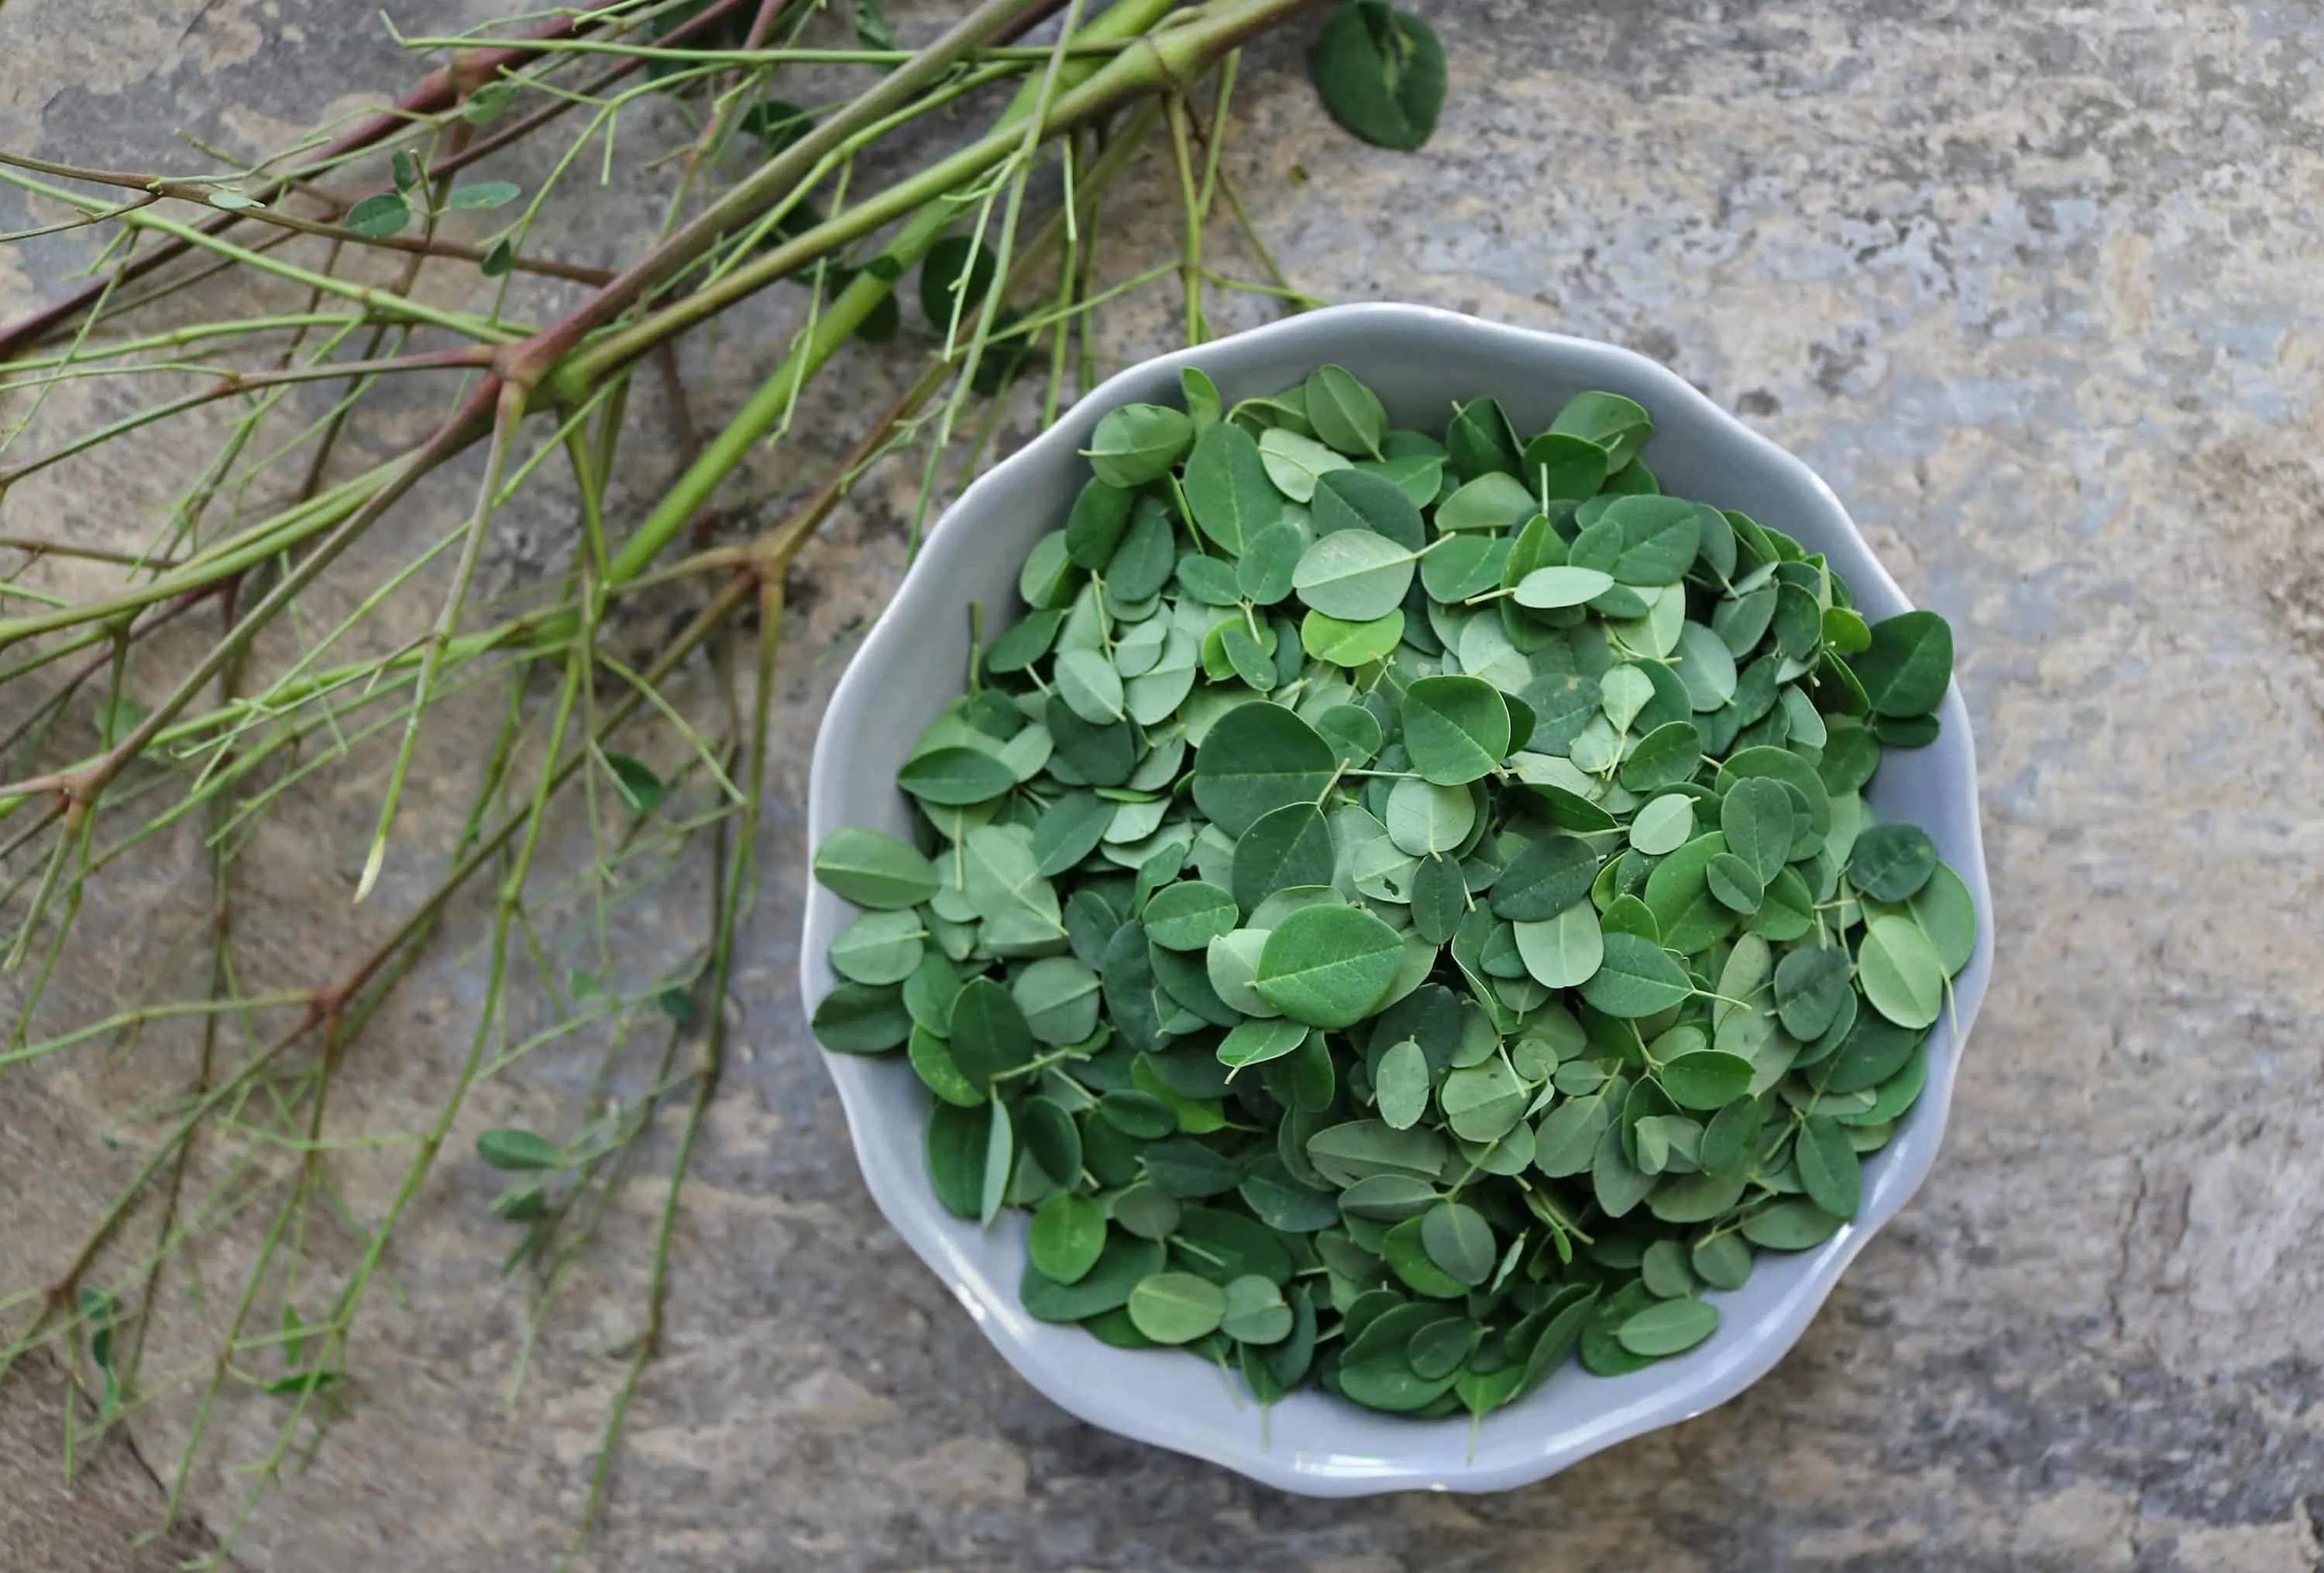 Using Fresh Moringa Leaves by placing the leaves in a bowl and discarding the stems.